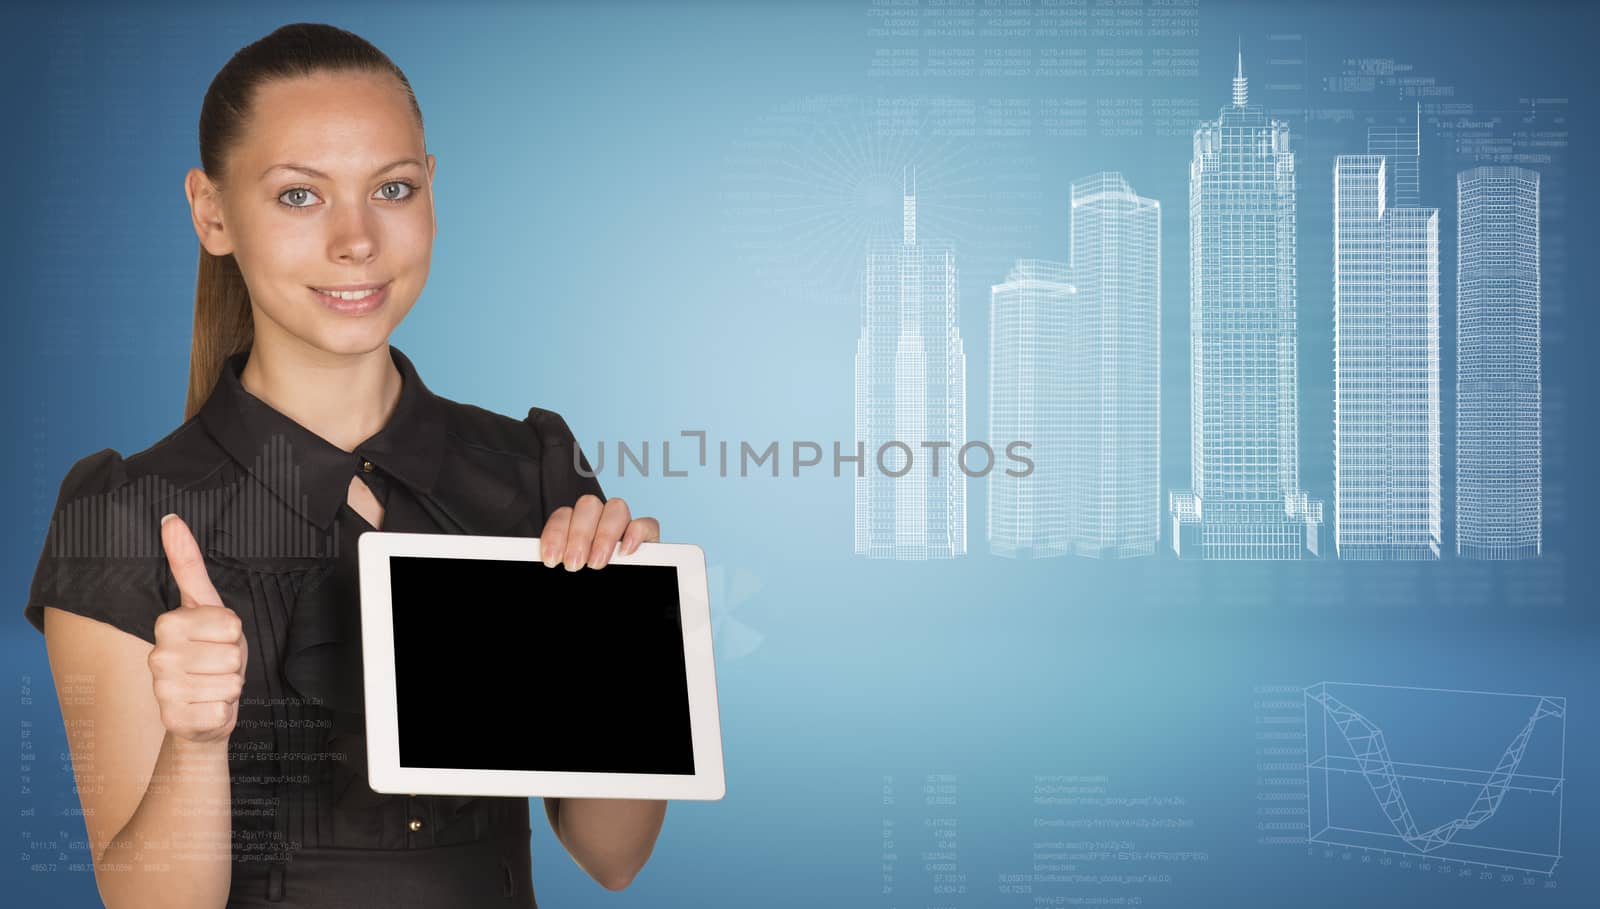 Beautiful businesswoman in dress smiling, holding tablet pc and showing thumb up. Buildings and figures as backdrop